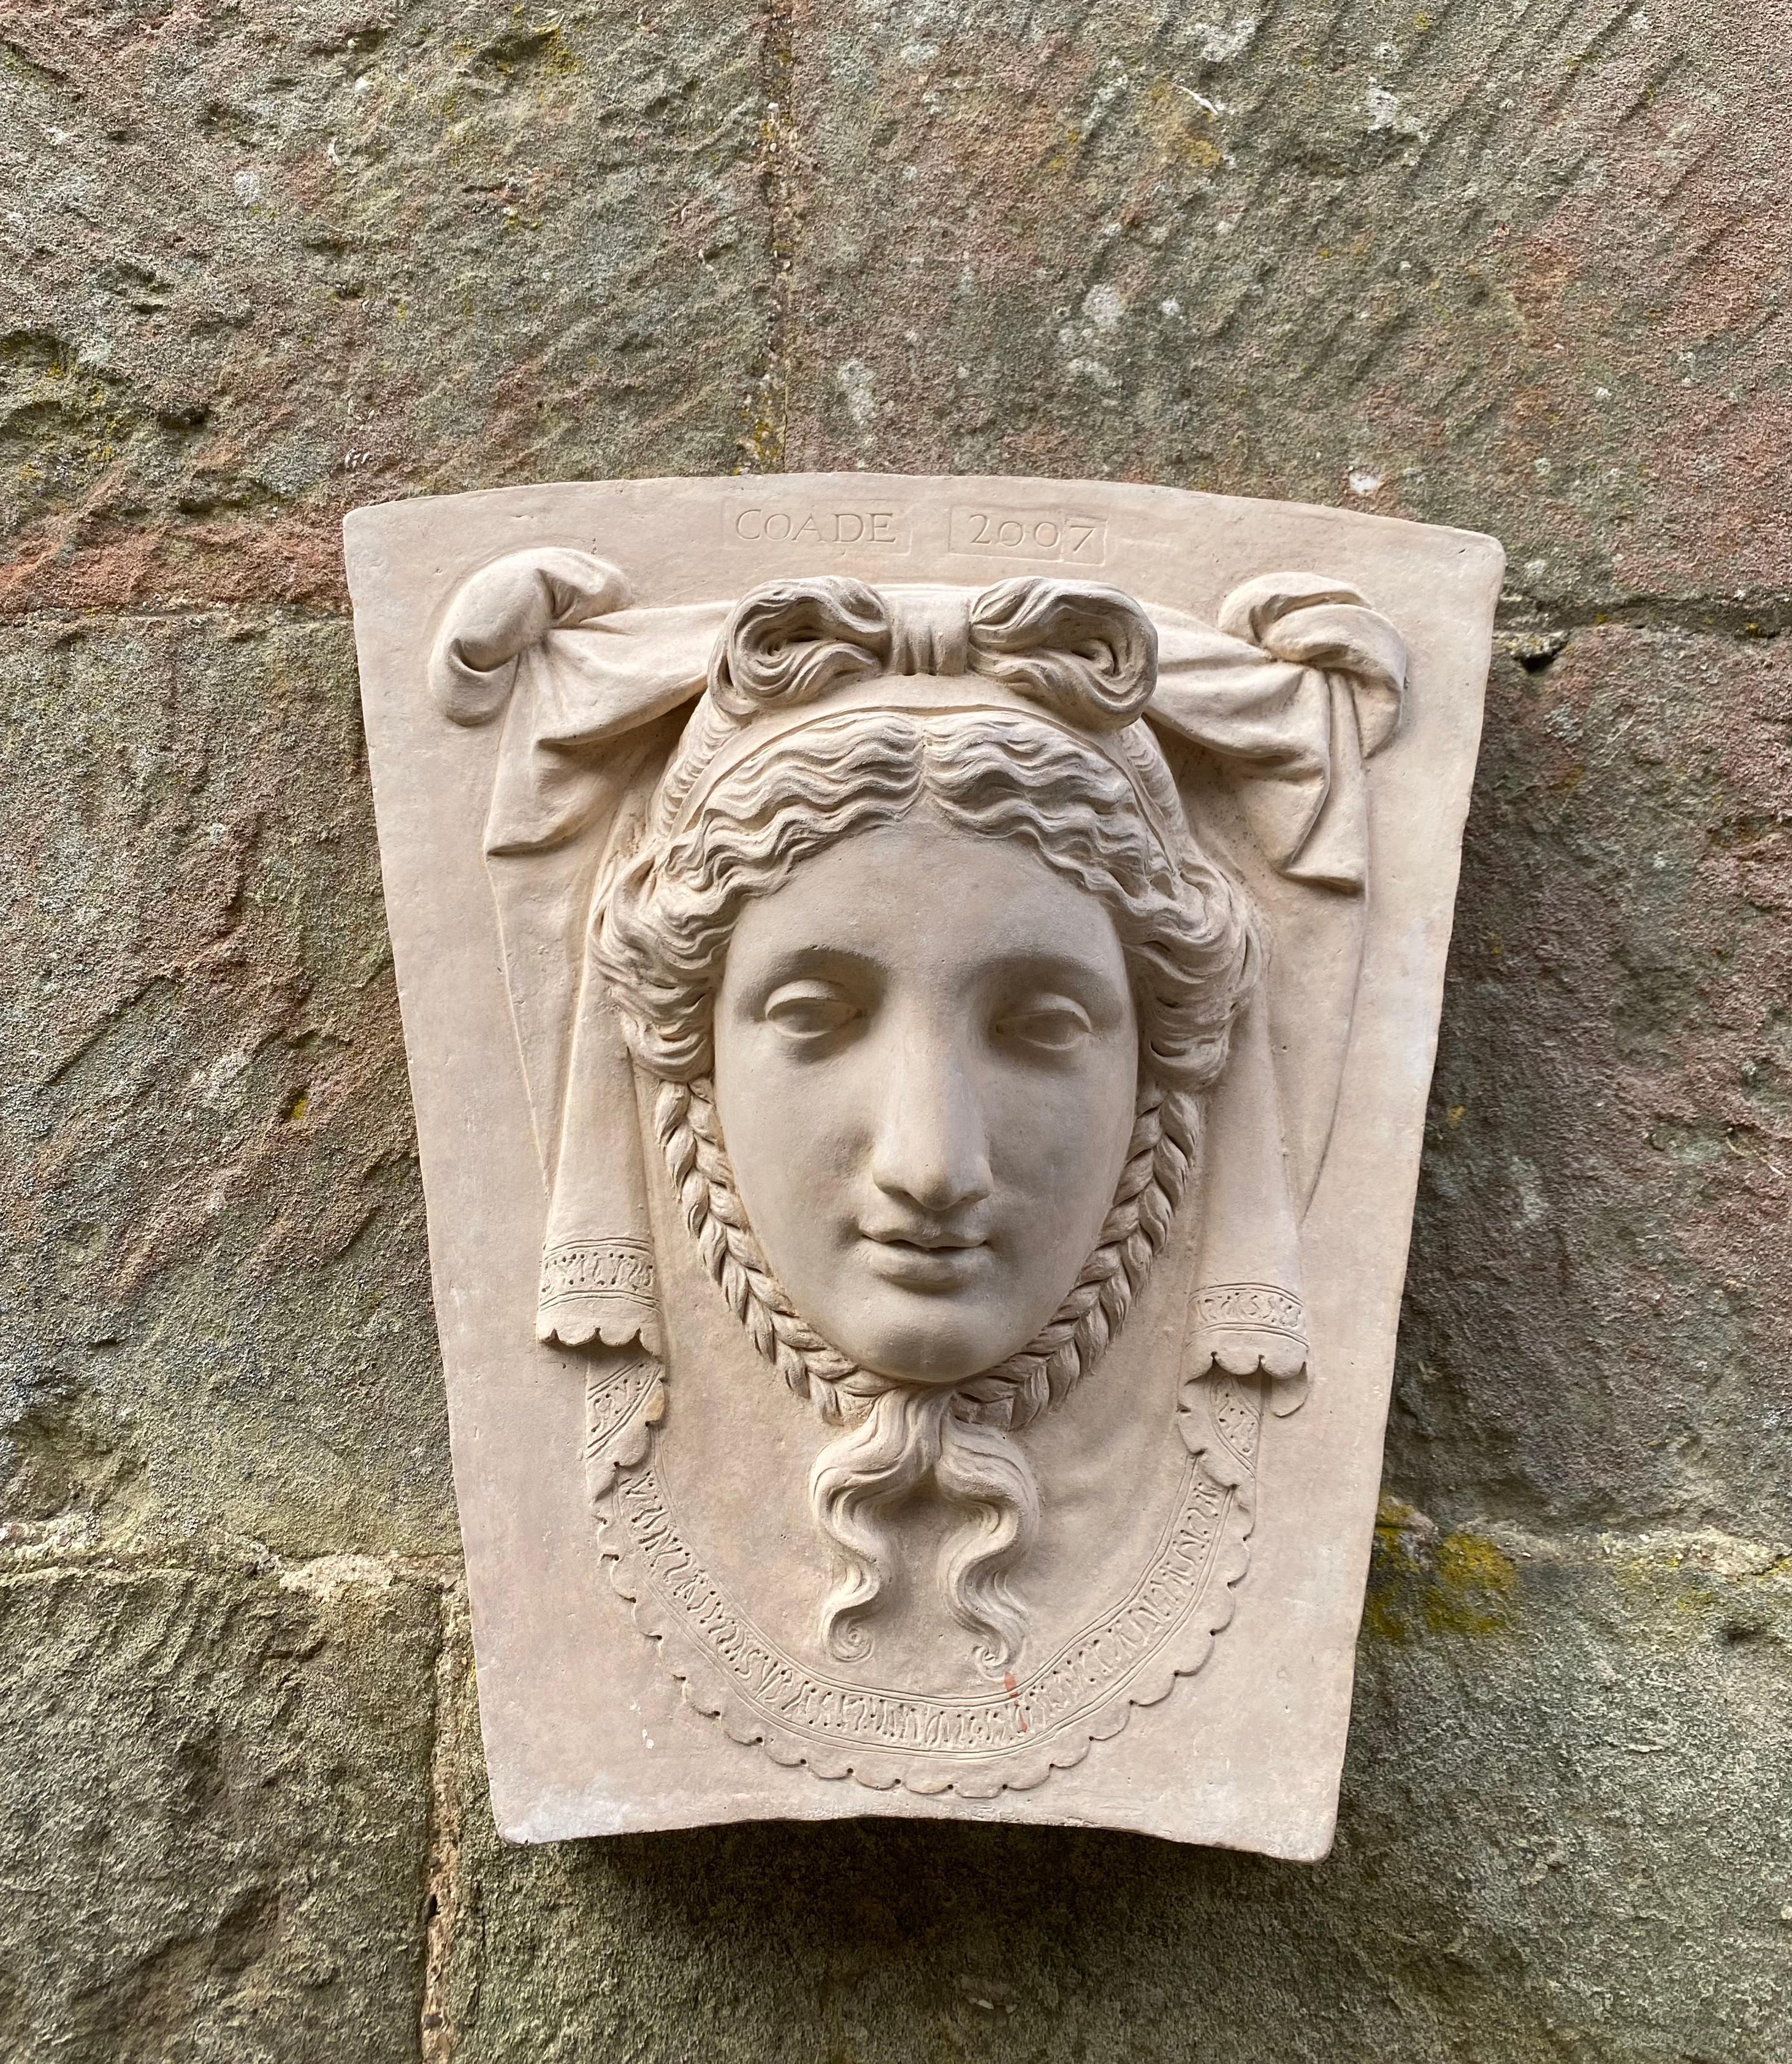 The Keystone female head draws its inspiration from an original 18th-century creation by Coade. The depiction showcases a female with plaited hair, backed by elegant drapery.

Keystones similar to this can be found adorning the tops of doors in